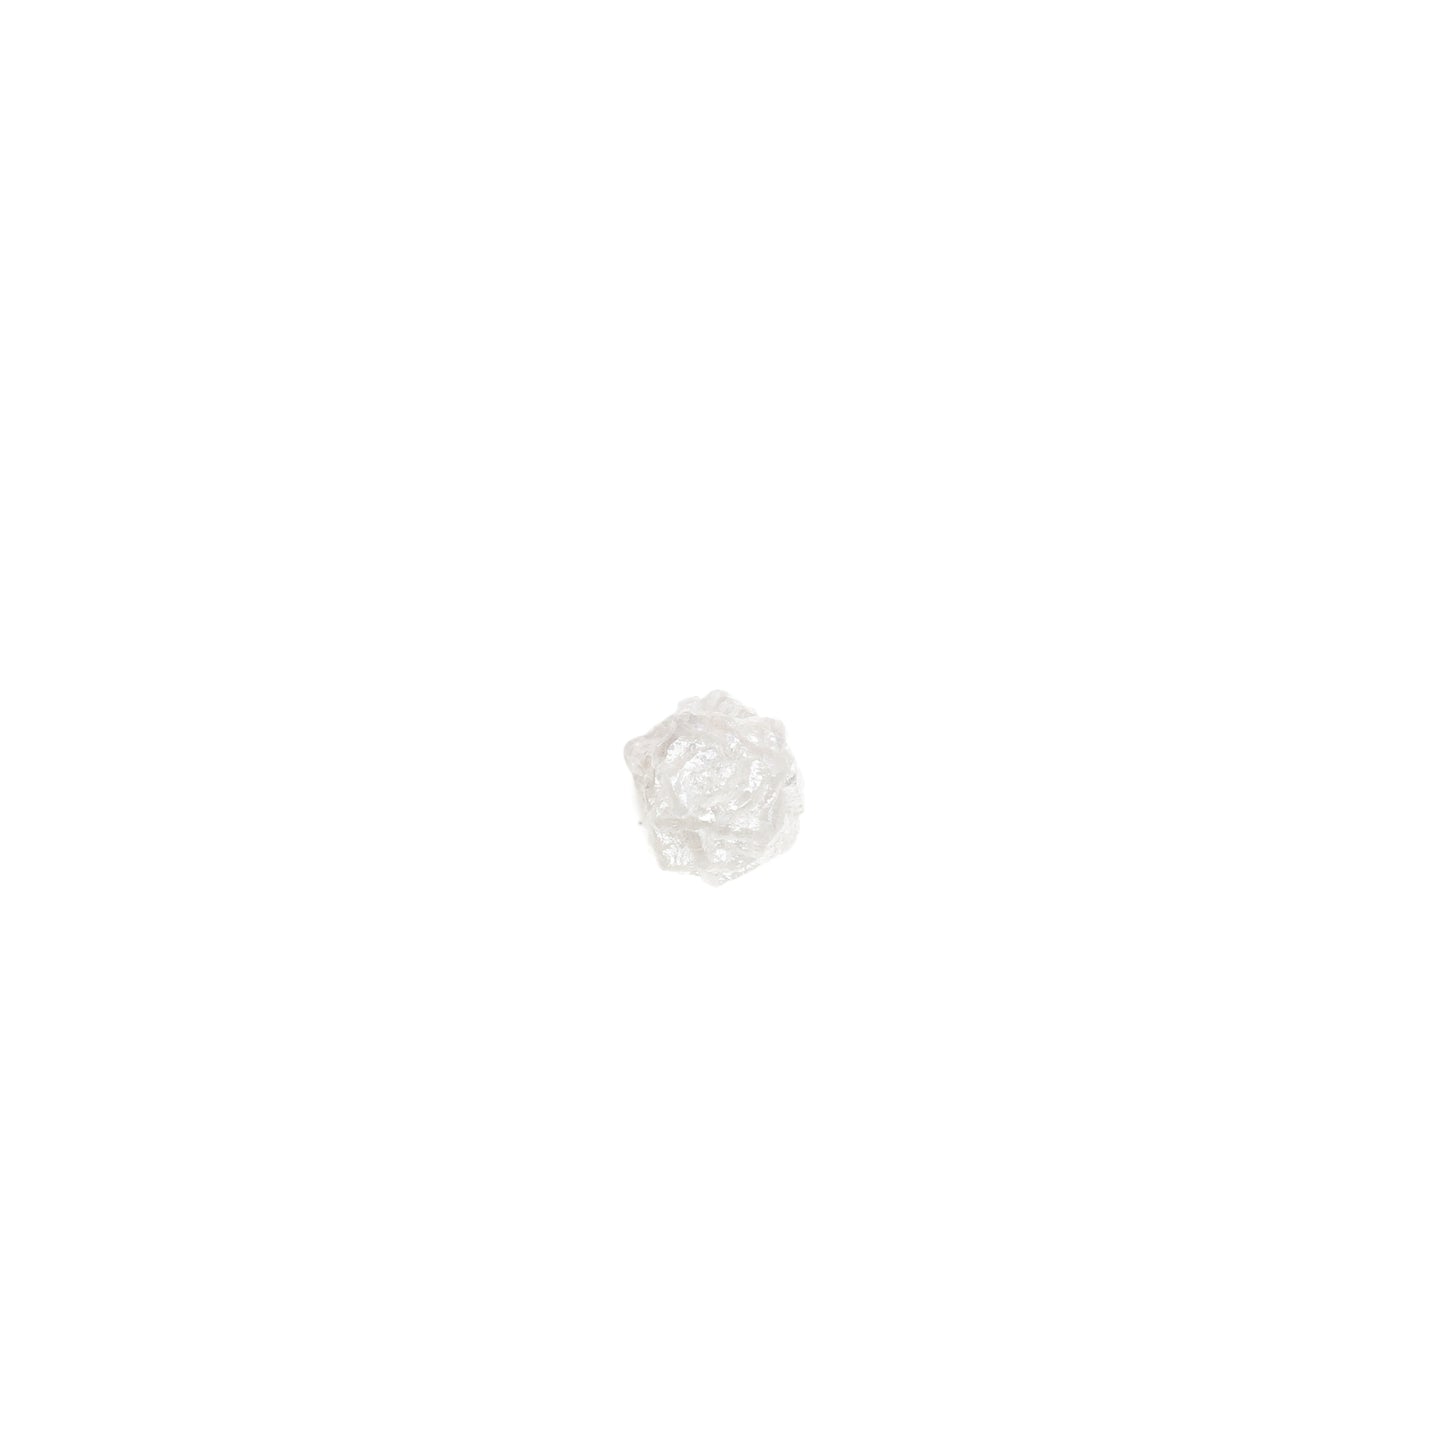 1.24 CT Snow White Rough Uncut Natural Diamond For Engagement Ring | Wedding Gift | Birthday Gift